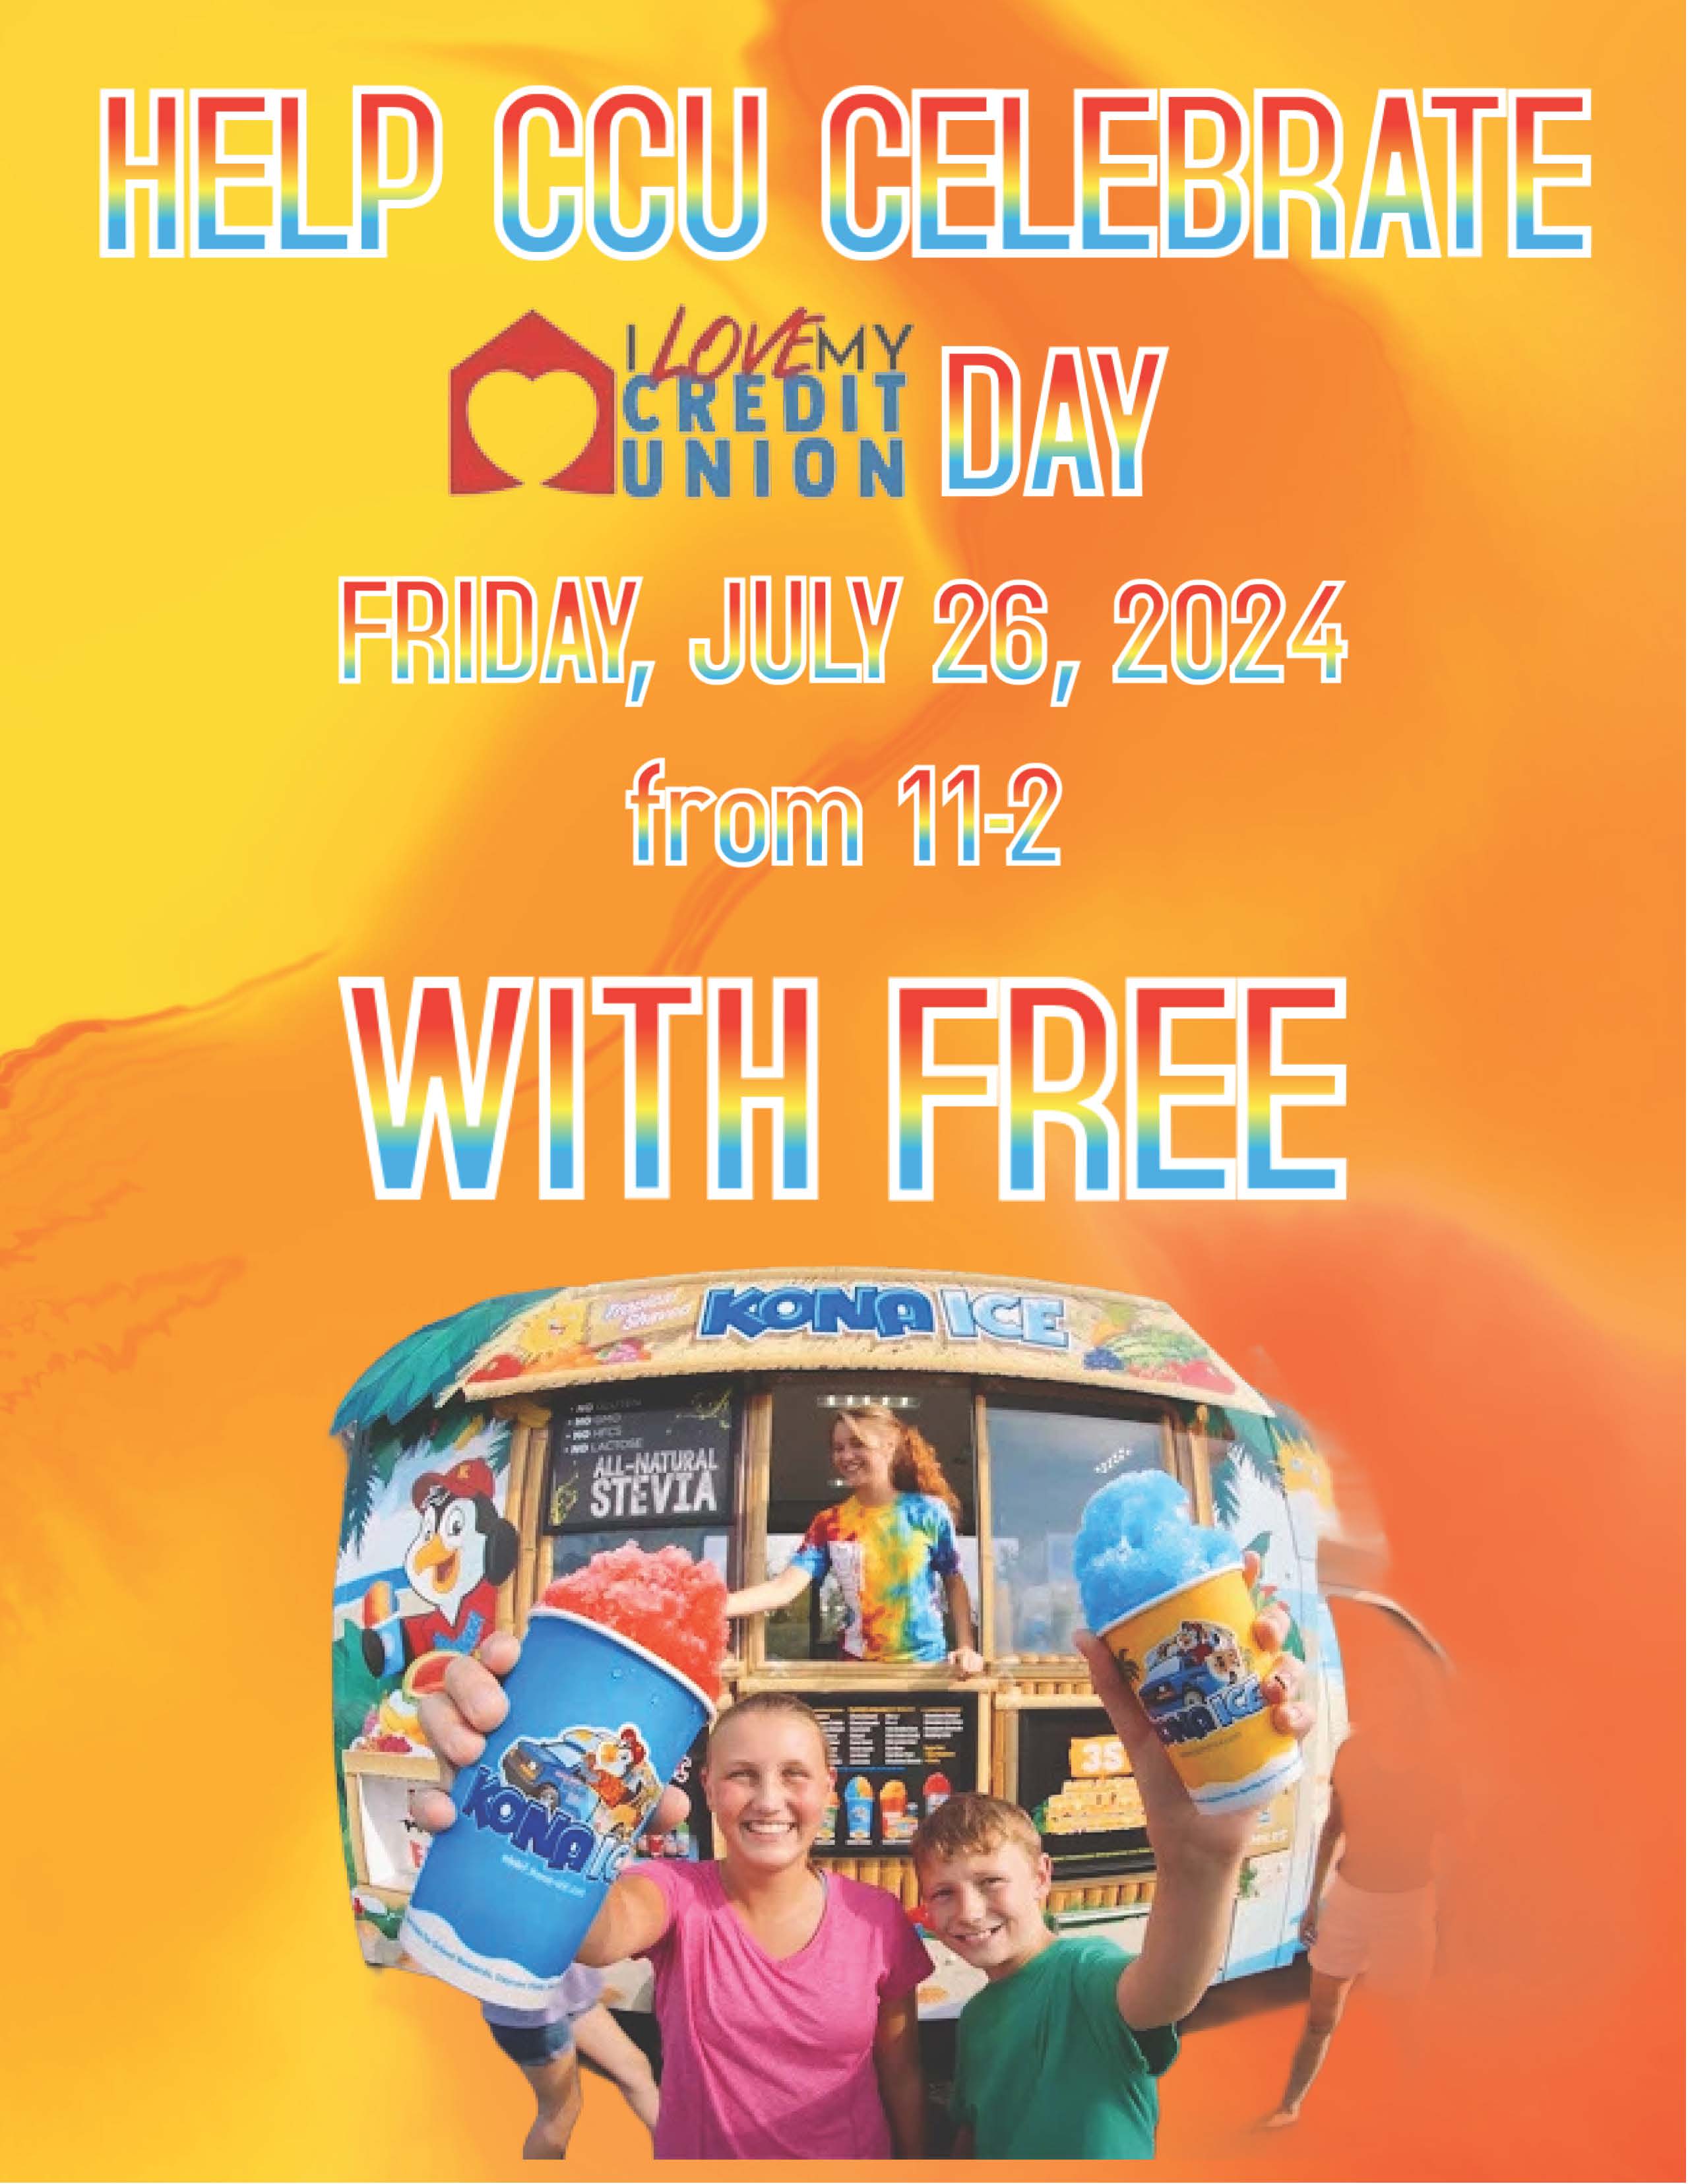 Help CCU Celebrate I Love My Credit Union Day Friday July 26, 2024 from 11-2 with FREE Kona Ice.  Image shows a mom and son standing in fron of KONA Ice truck smiling and holding KONA Ice cups in their hands